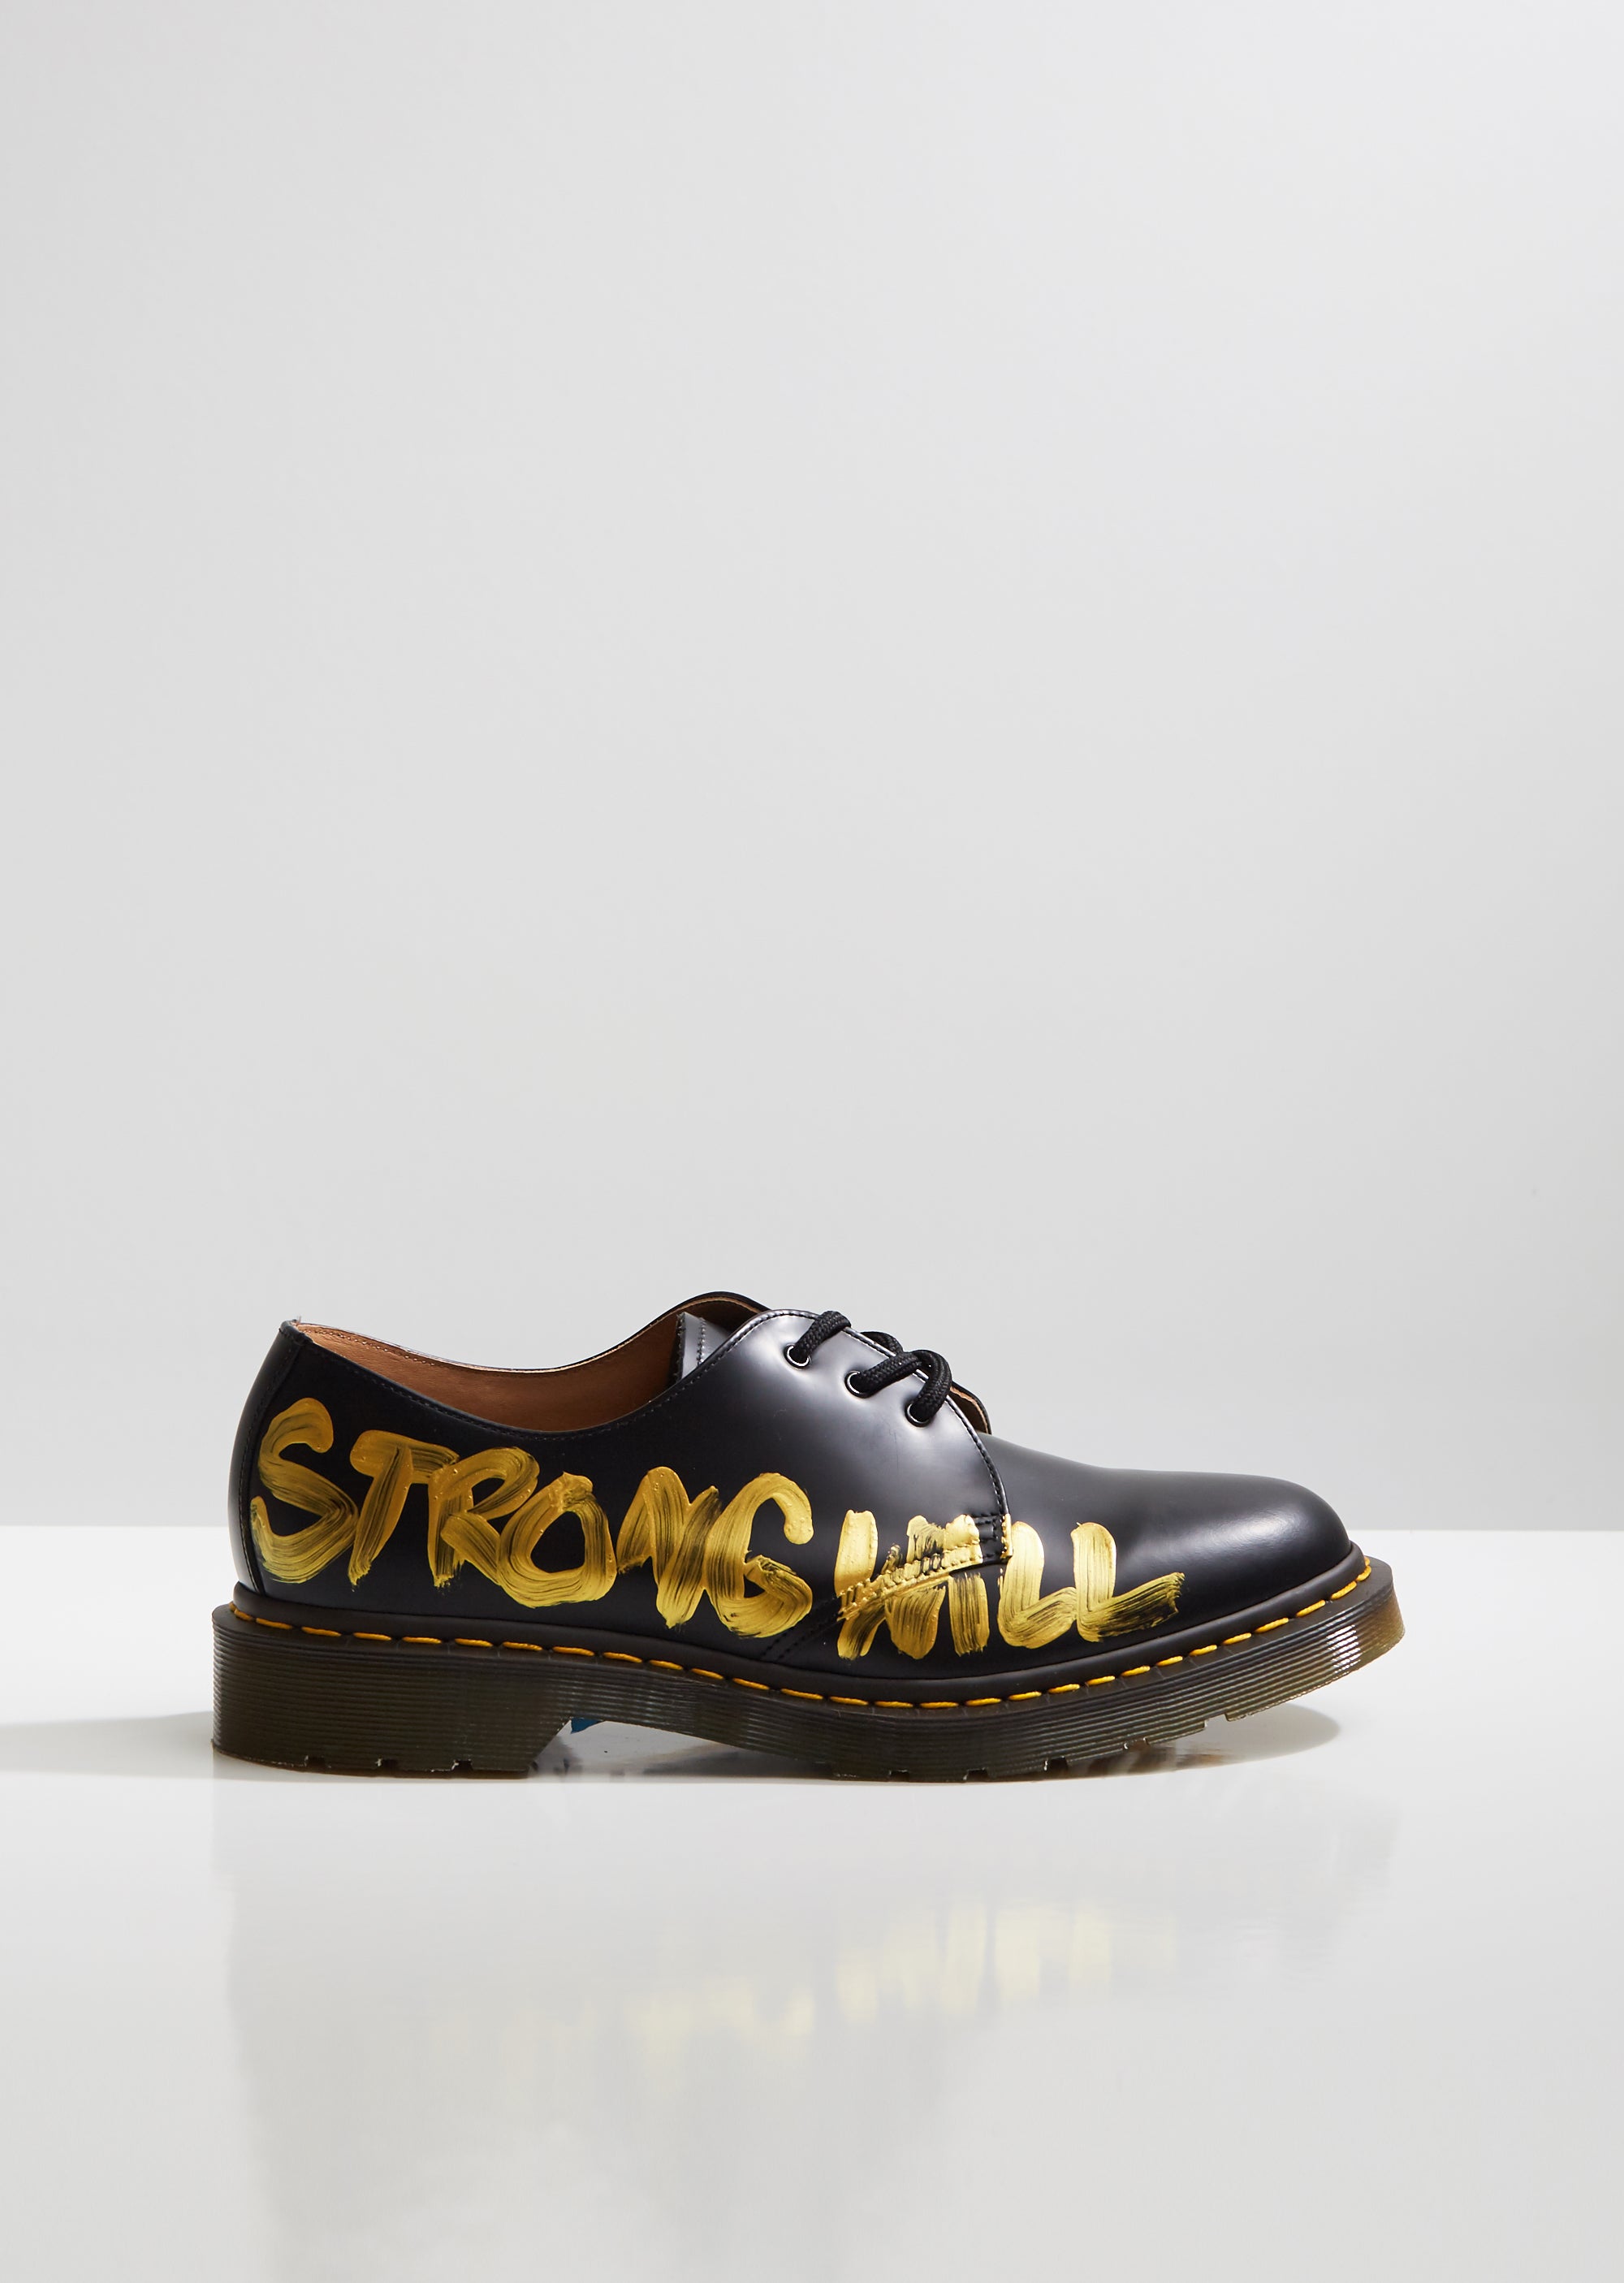 Dr. Martens Hand Painted Smooth Leather Oxfords by Comme des ...